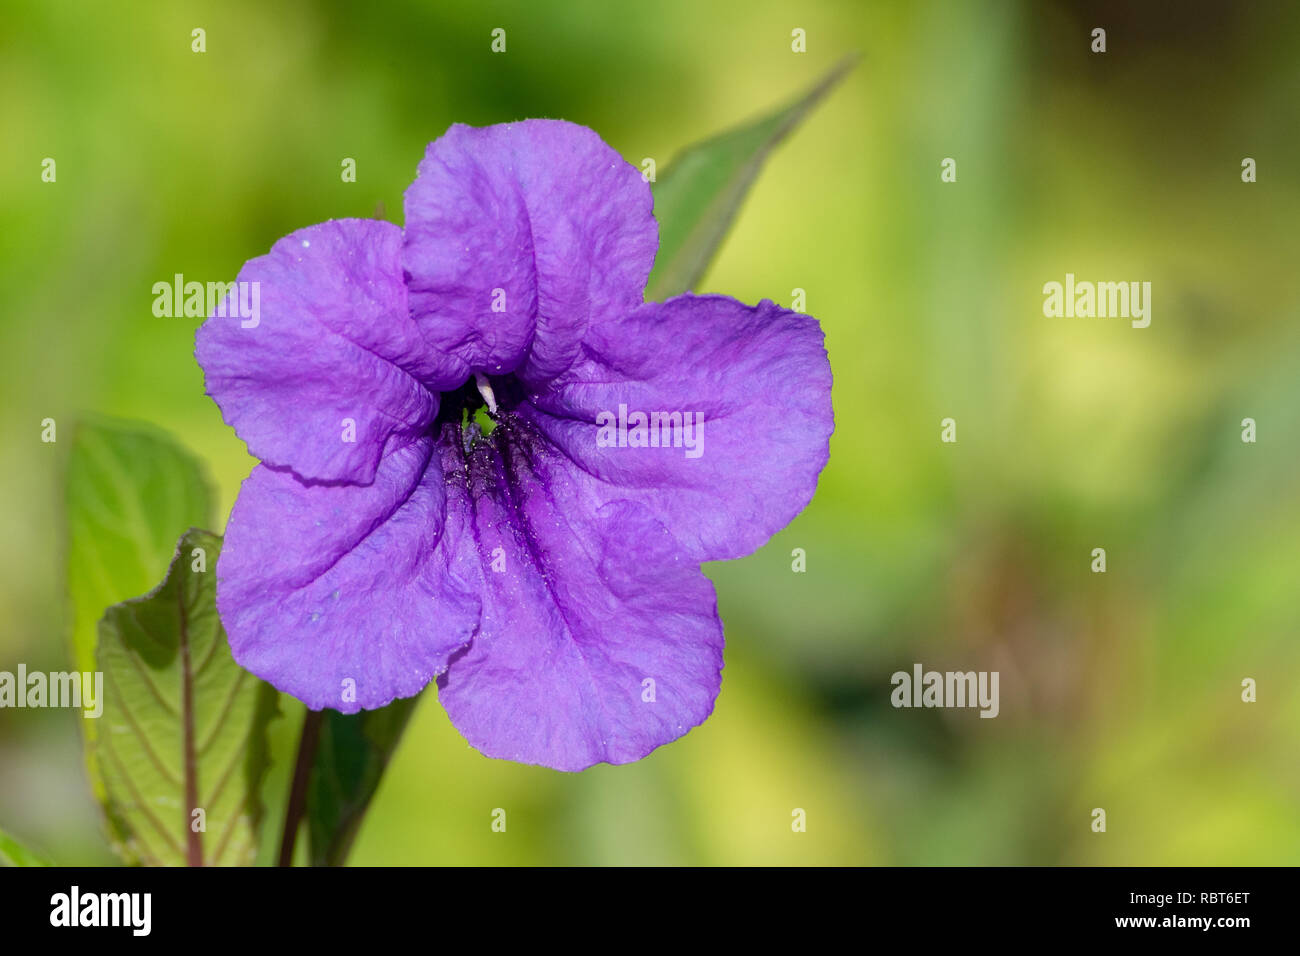 One beautiful close up of a purple wild petunia (fringeleaf wild petunia, hairy petunia, low wild petunia) with green background. Stock Photo